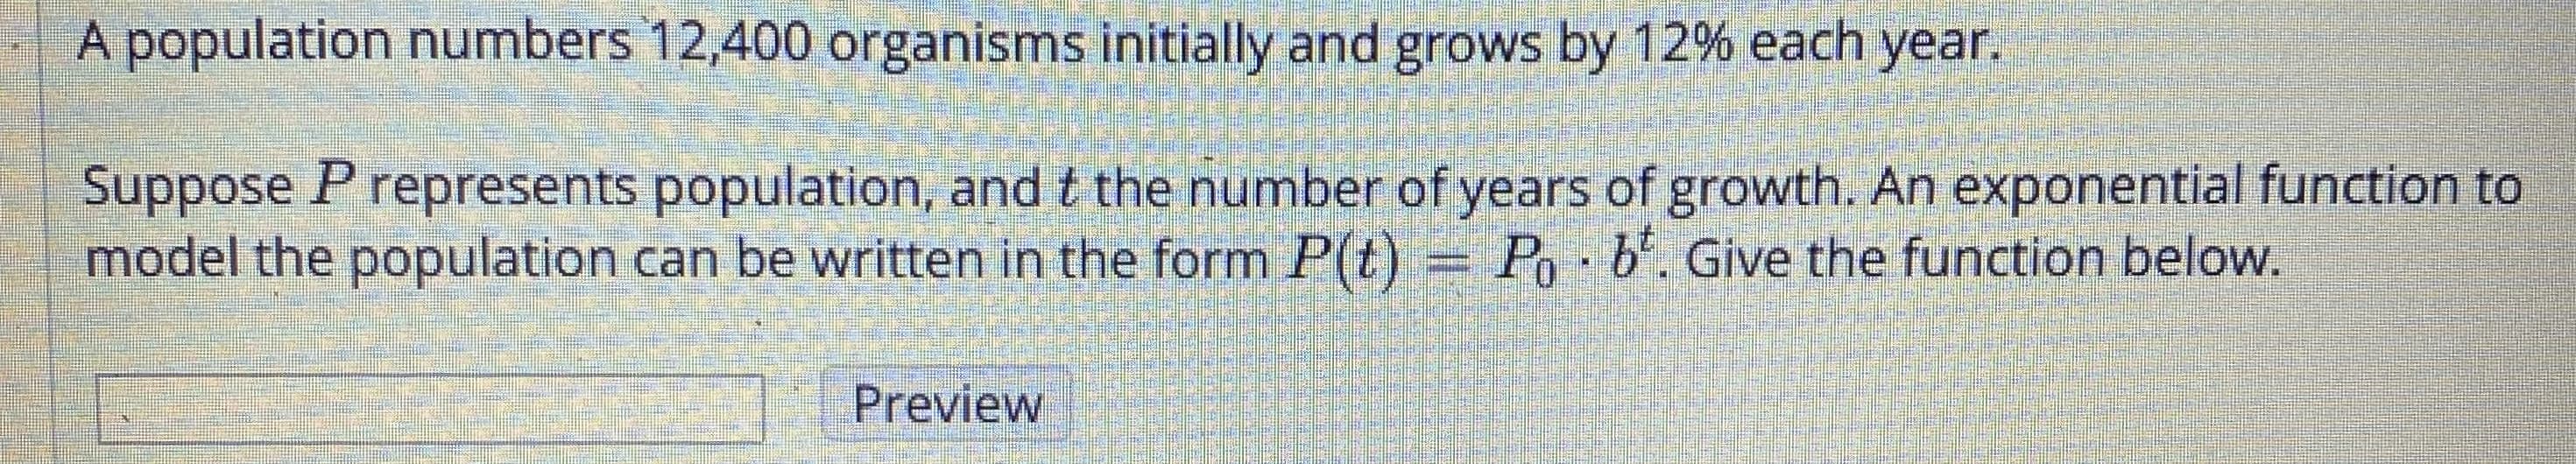 A population numbers 12,400 organisms initially and grows by 12% each year.
Suppose P represents population, and t the number of years of growth. An exponential function to
model the population can be written in the form P(t) = Po - b'. Give the function below.
Preview
